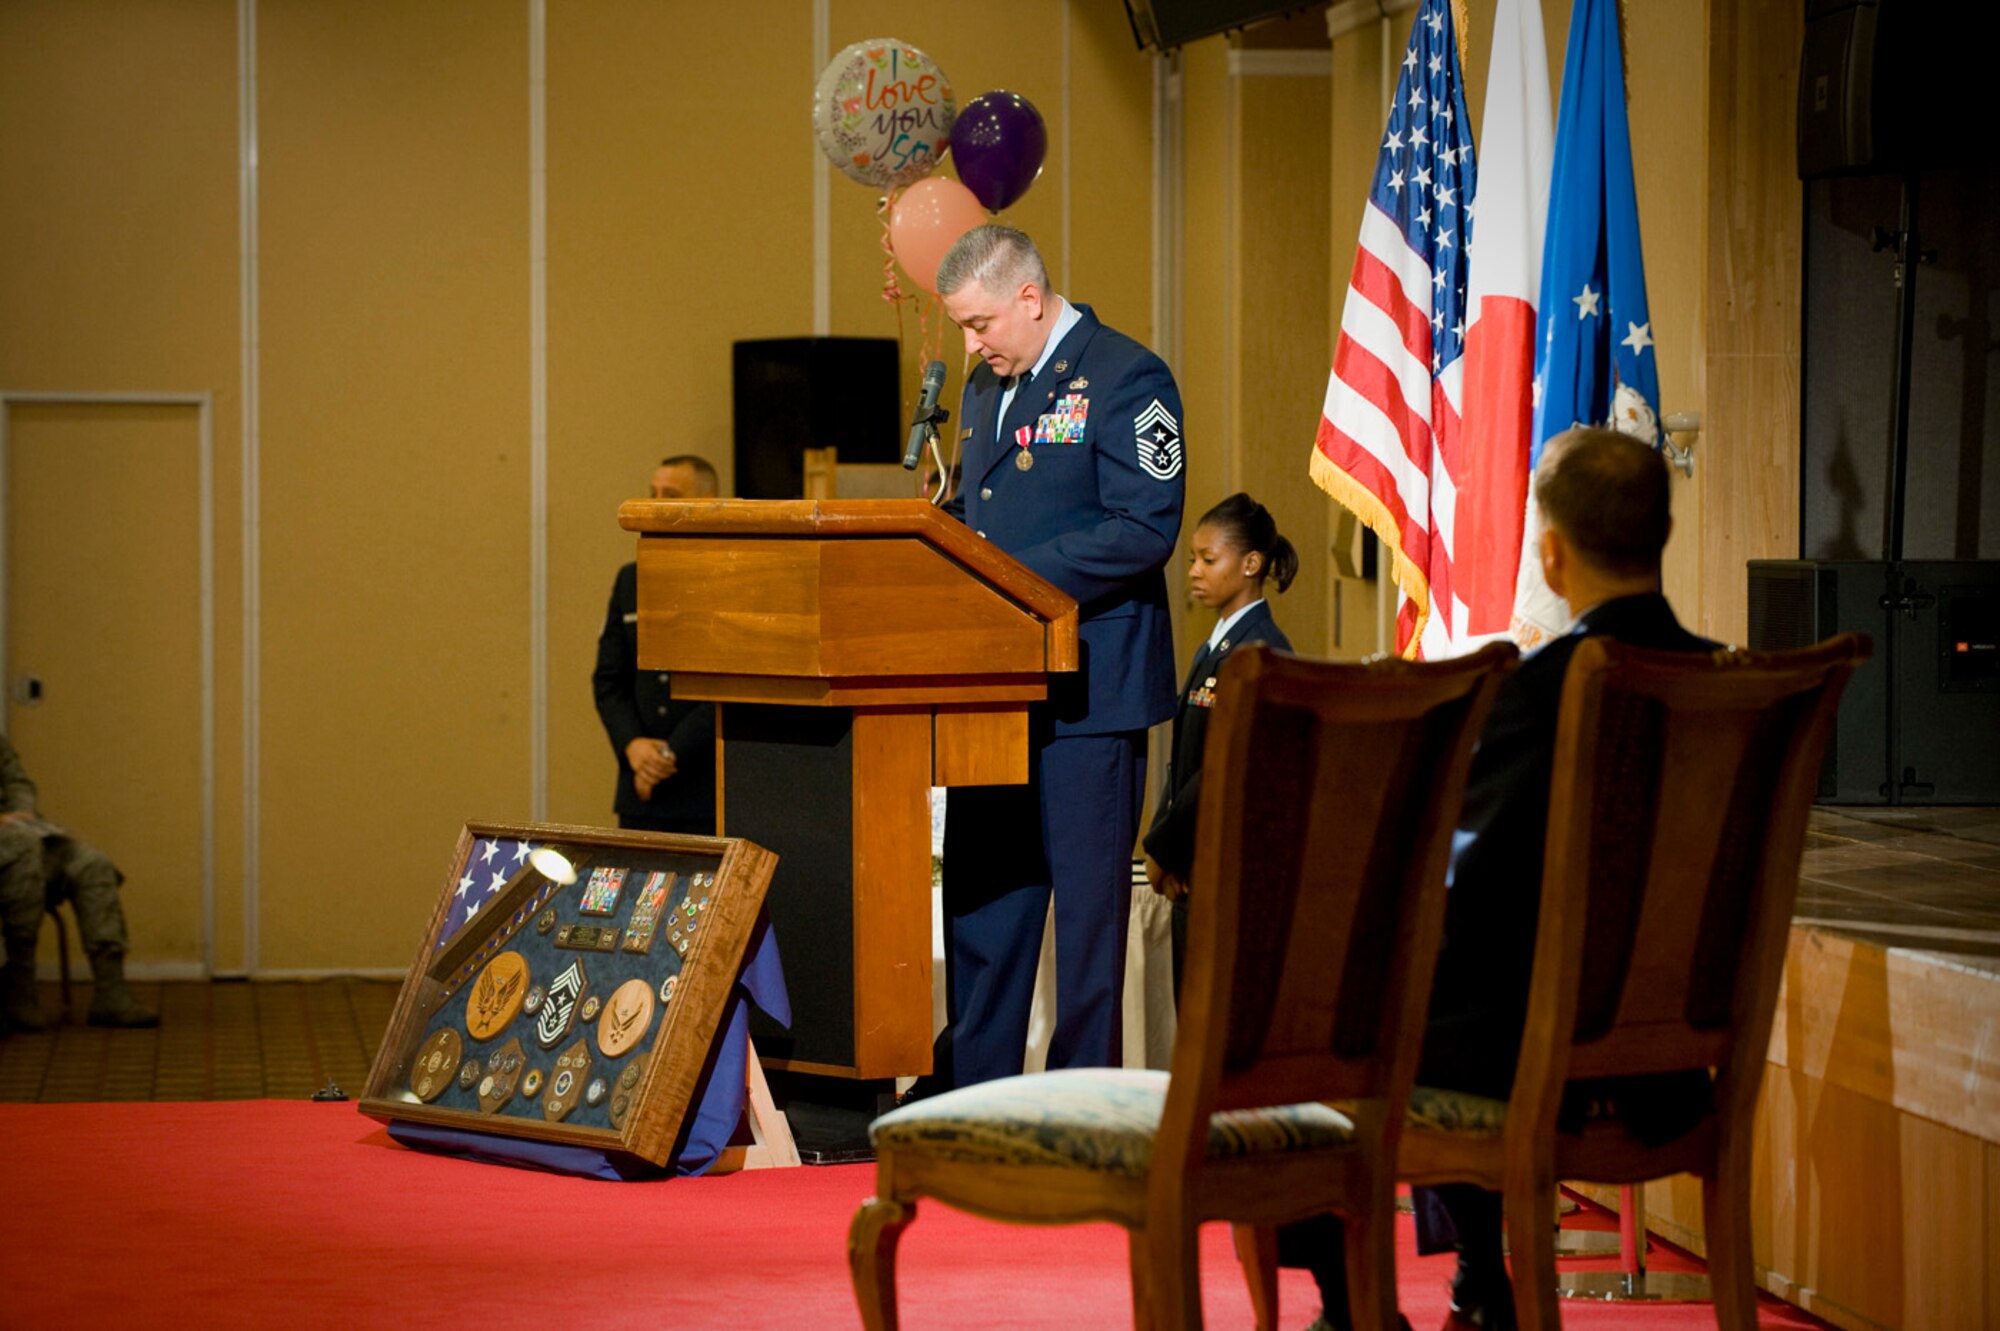 MISAWA AIR BASE, Japan -- Chief Master Sgt. Ricky Price reads an old birthday letter from his mother during his retirement speech June 19, 2009. Chief Price credited his parents for raising him to have the character he relied on throughout his military career. (U.S. Air Force photo by Staff Sgt. Samuel Morse)